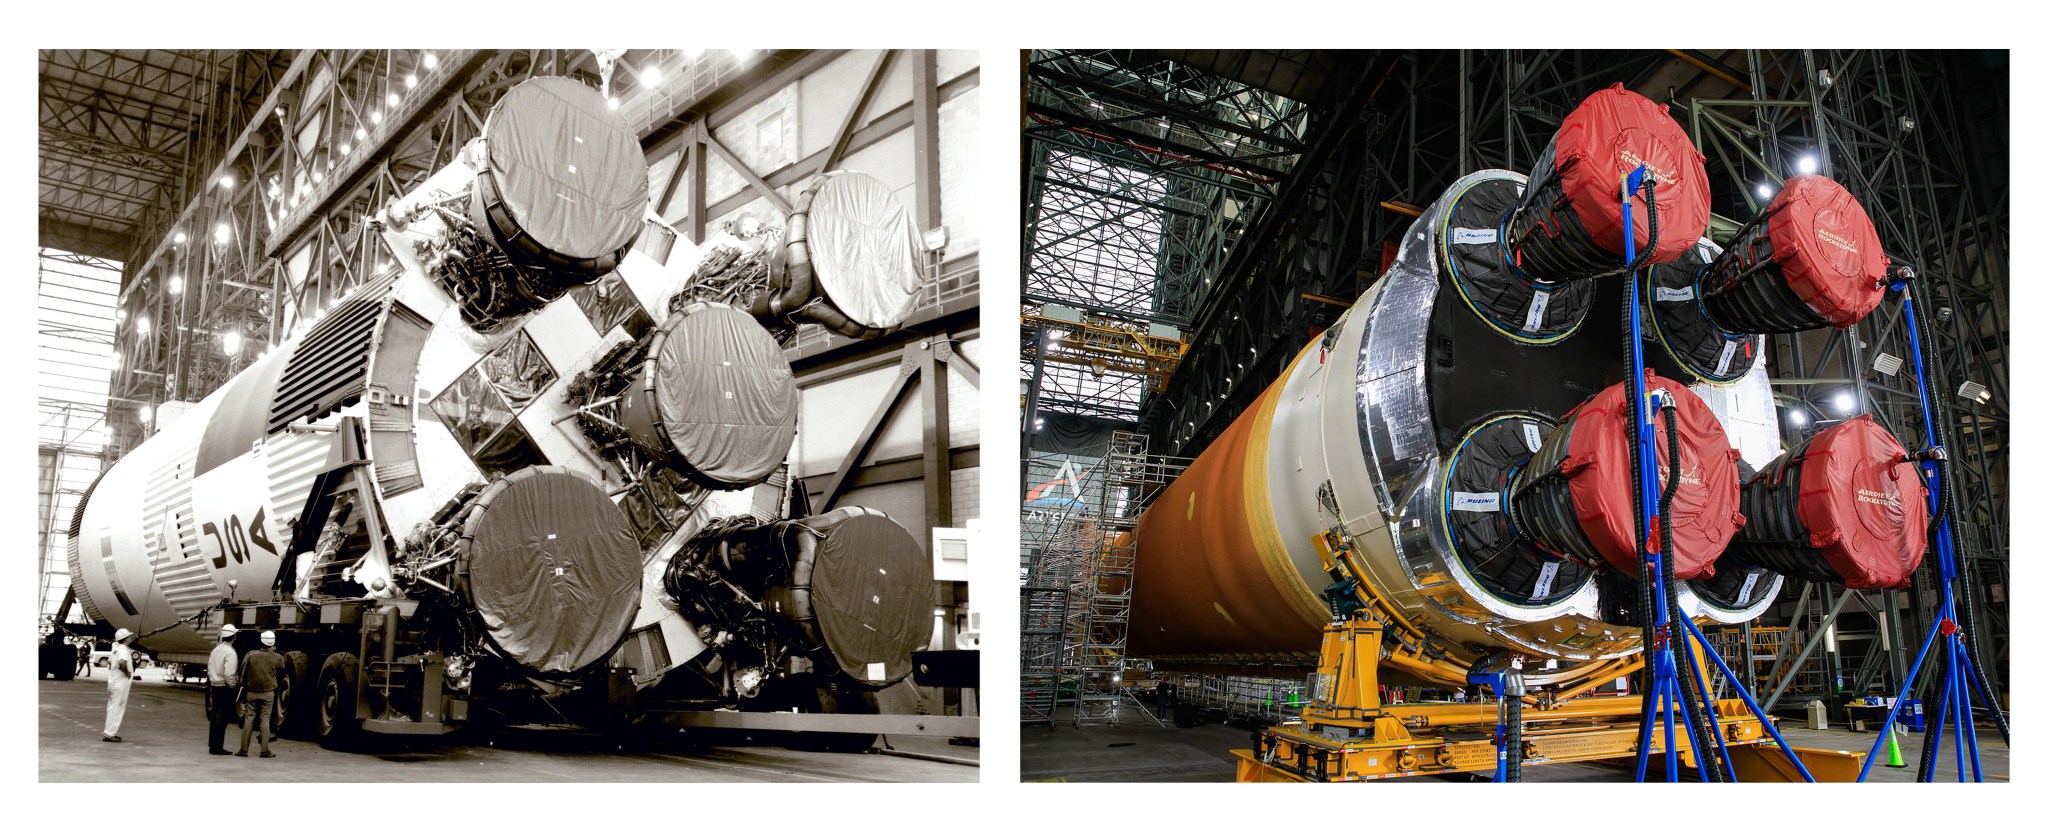 A side by side comparison of the Saturn V rocket's first stage that flew on the Apollo 11 mission and the core stage of the Space Launch System rocket that will fly on Artemis I.